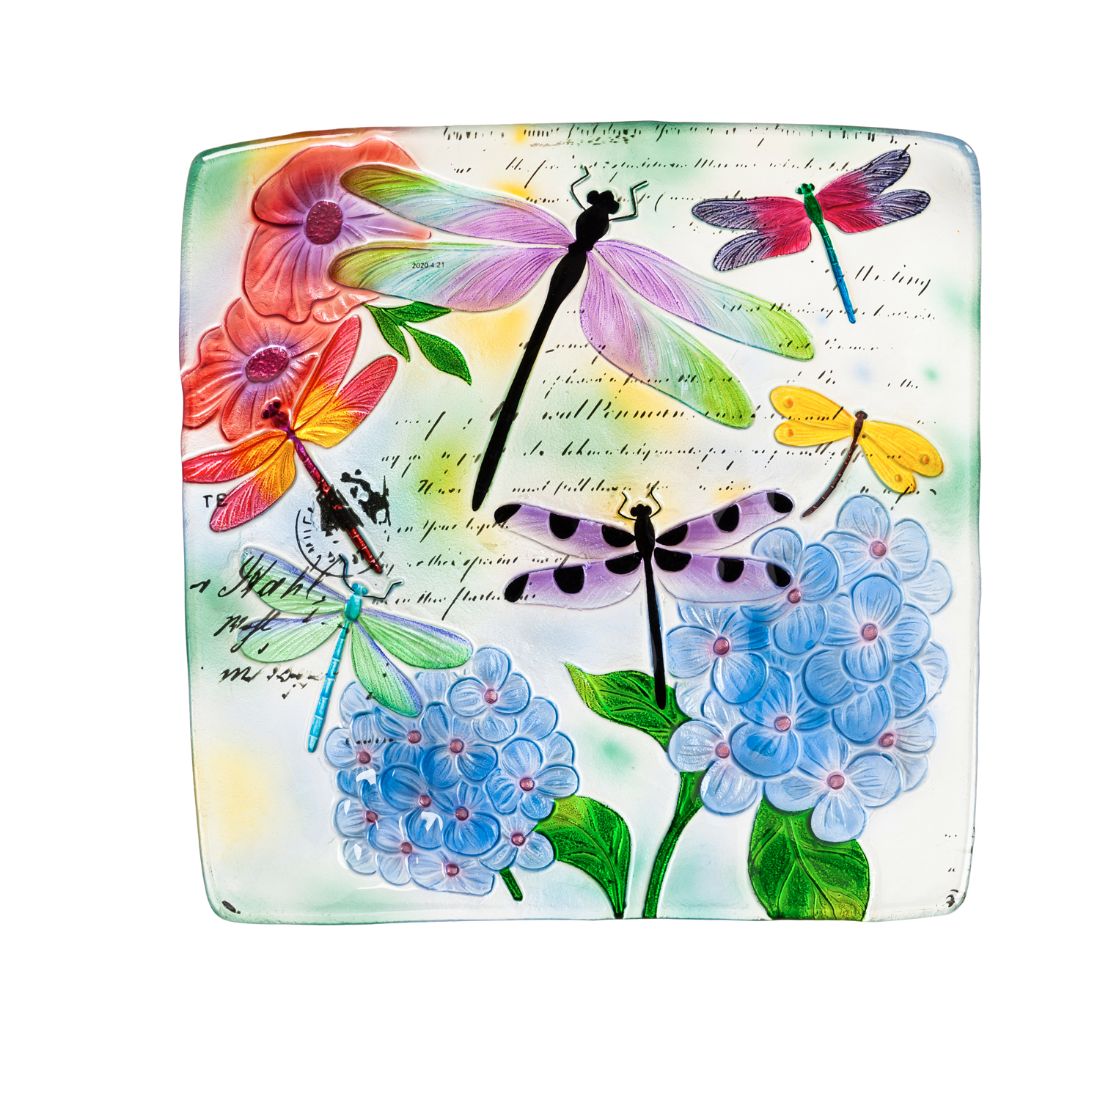 16.5" Hand Painted Embossed Square Glass Bird Bath, Dragonfly Prints